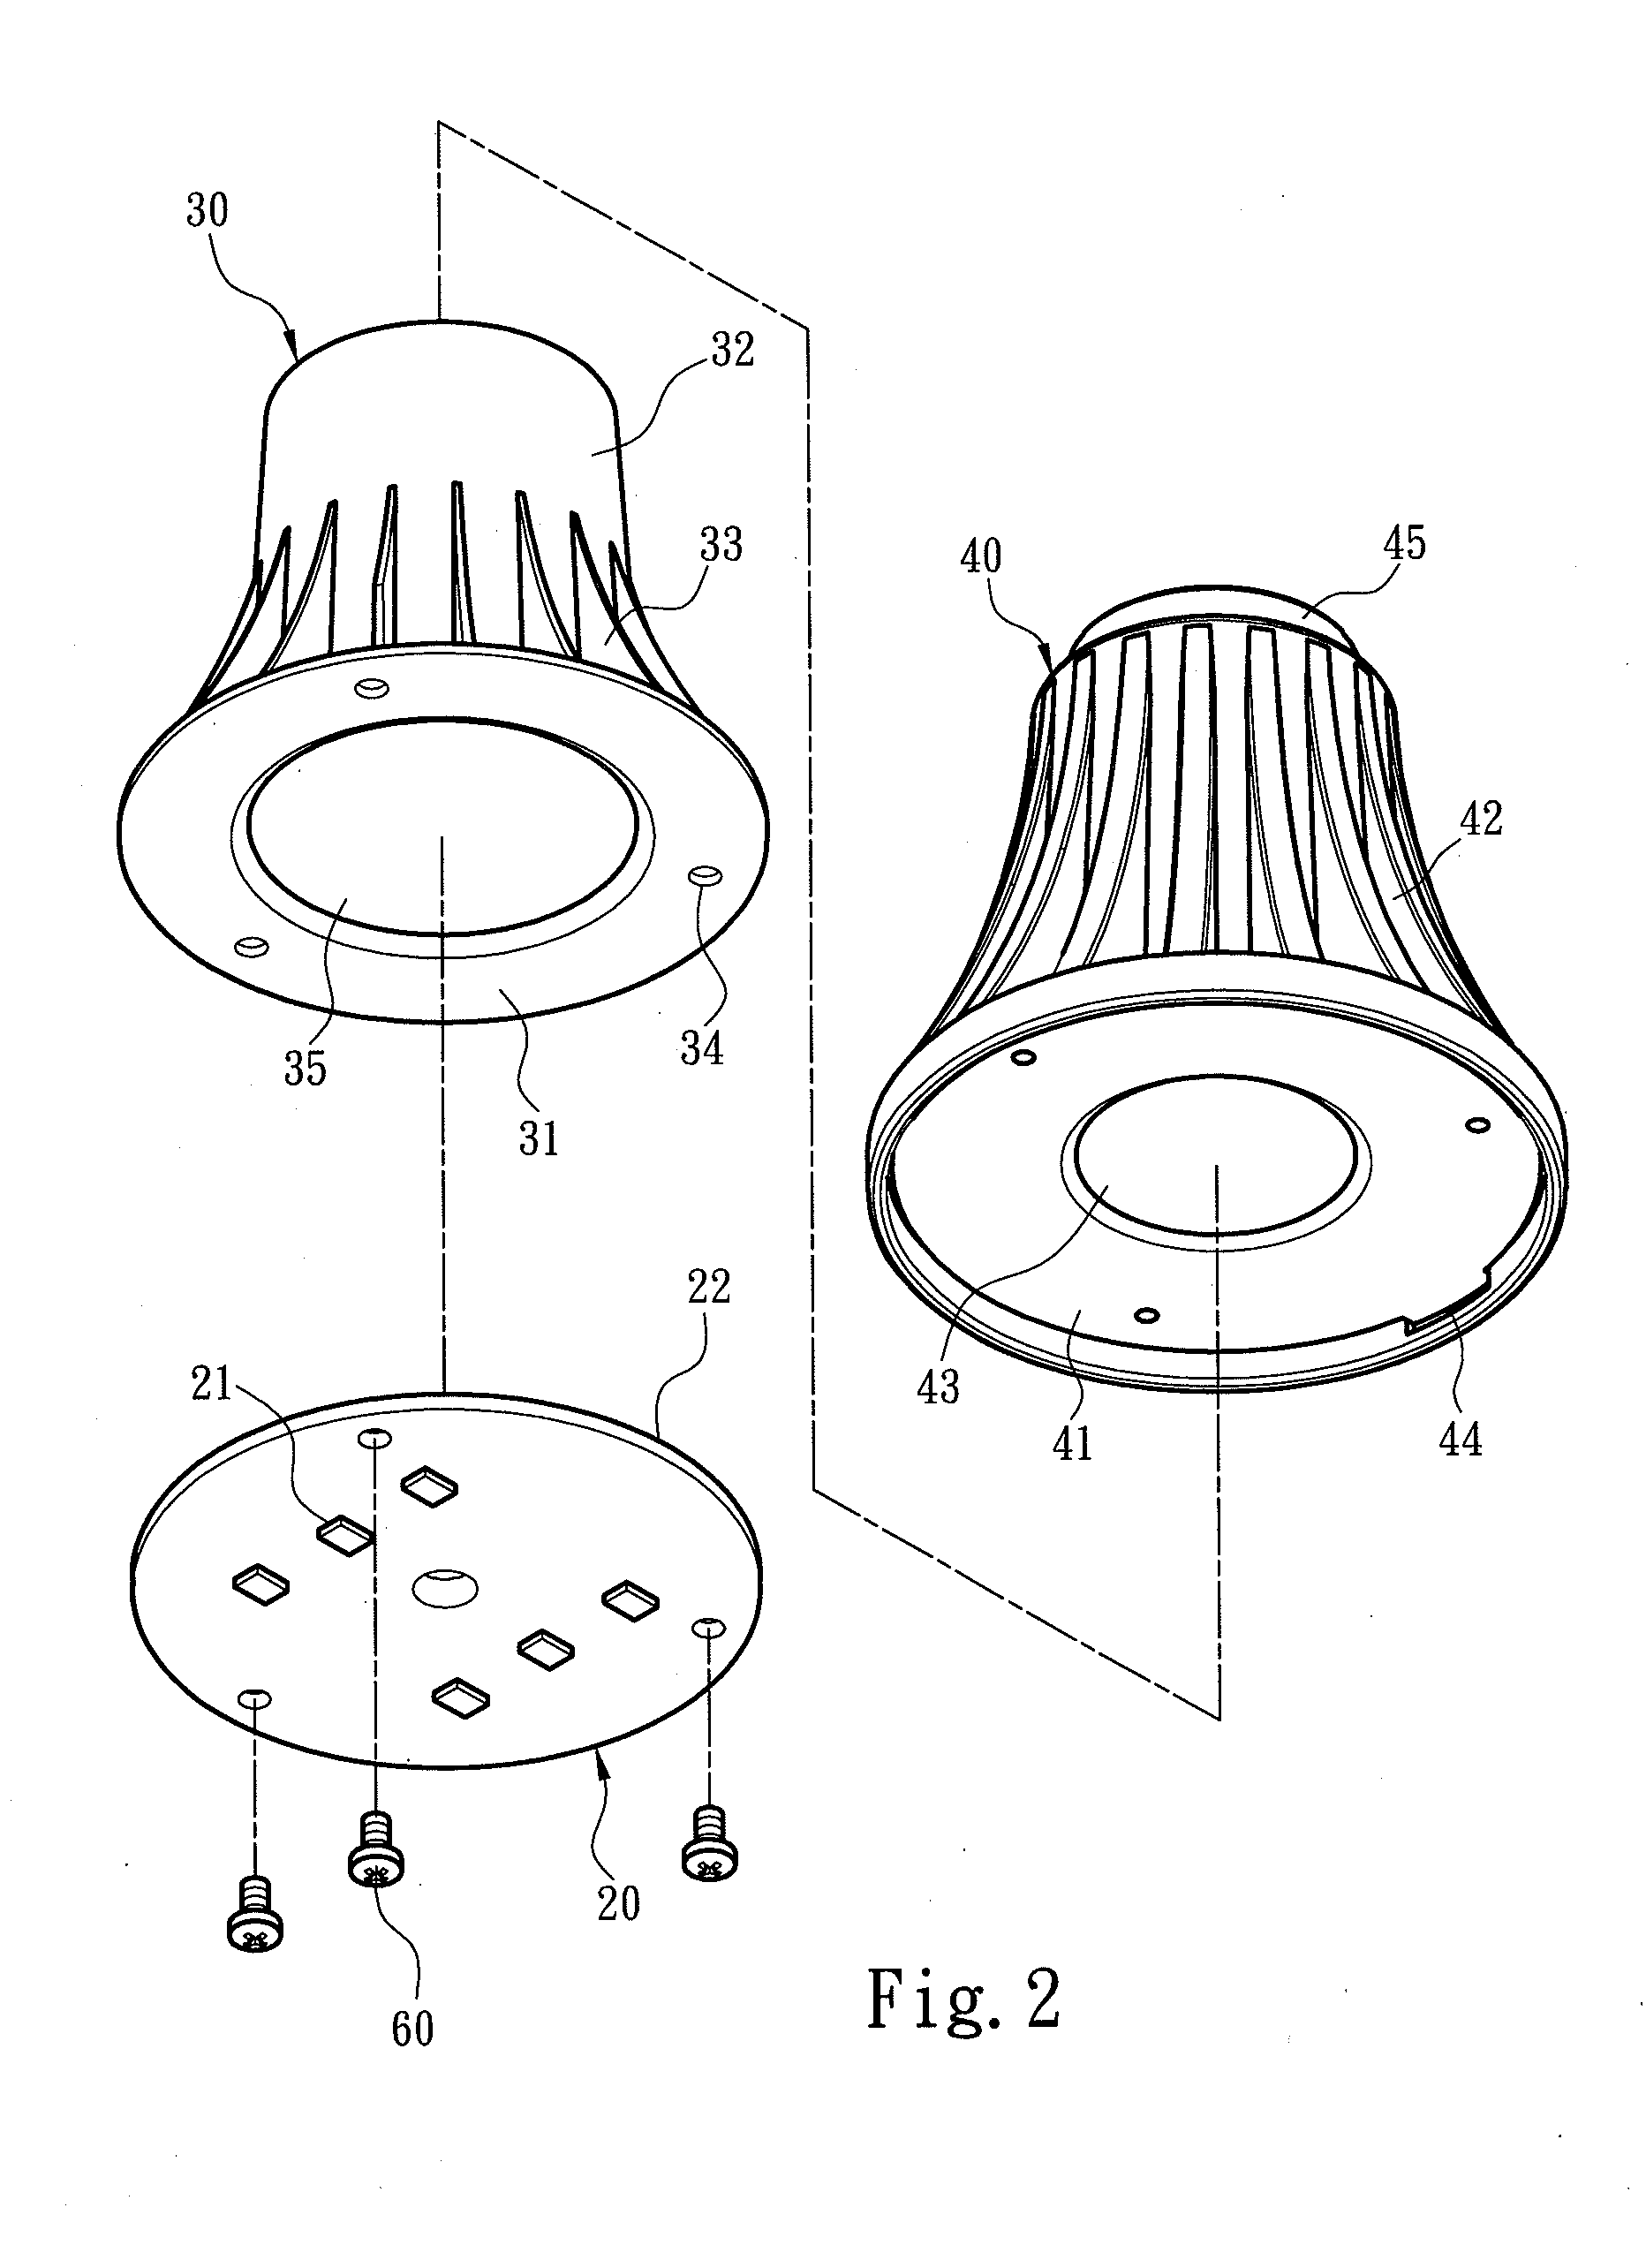 Light emitting diode bulb structure for enhancing heat dissipation efficiency